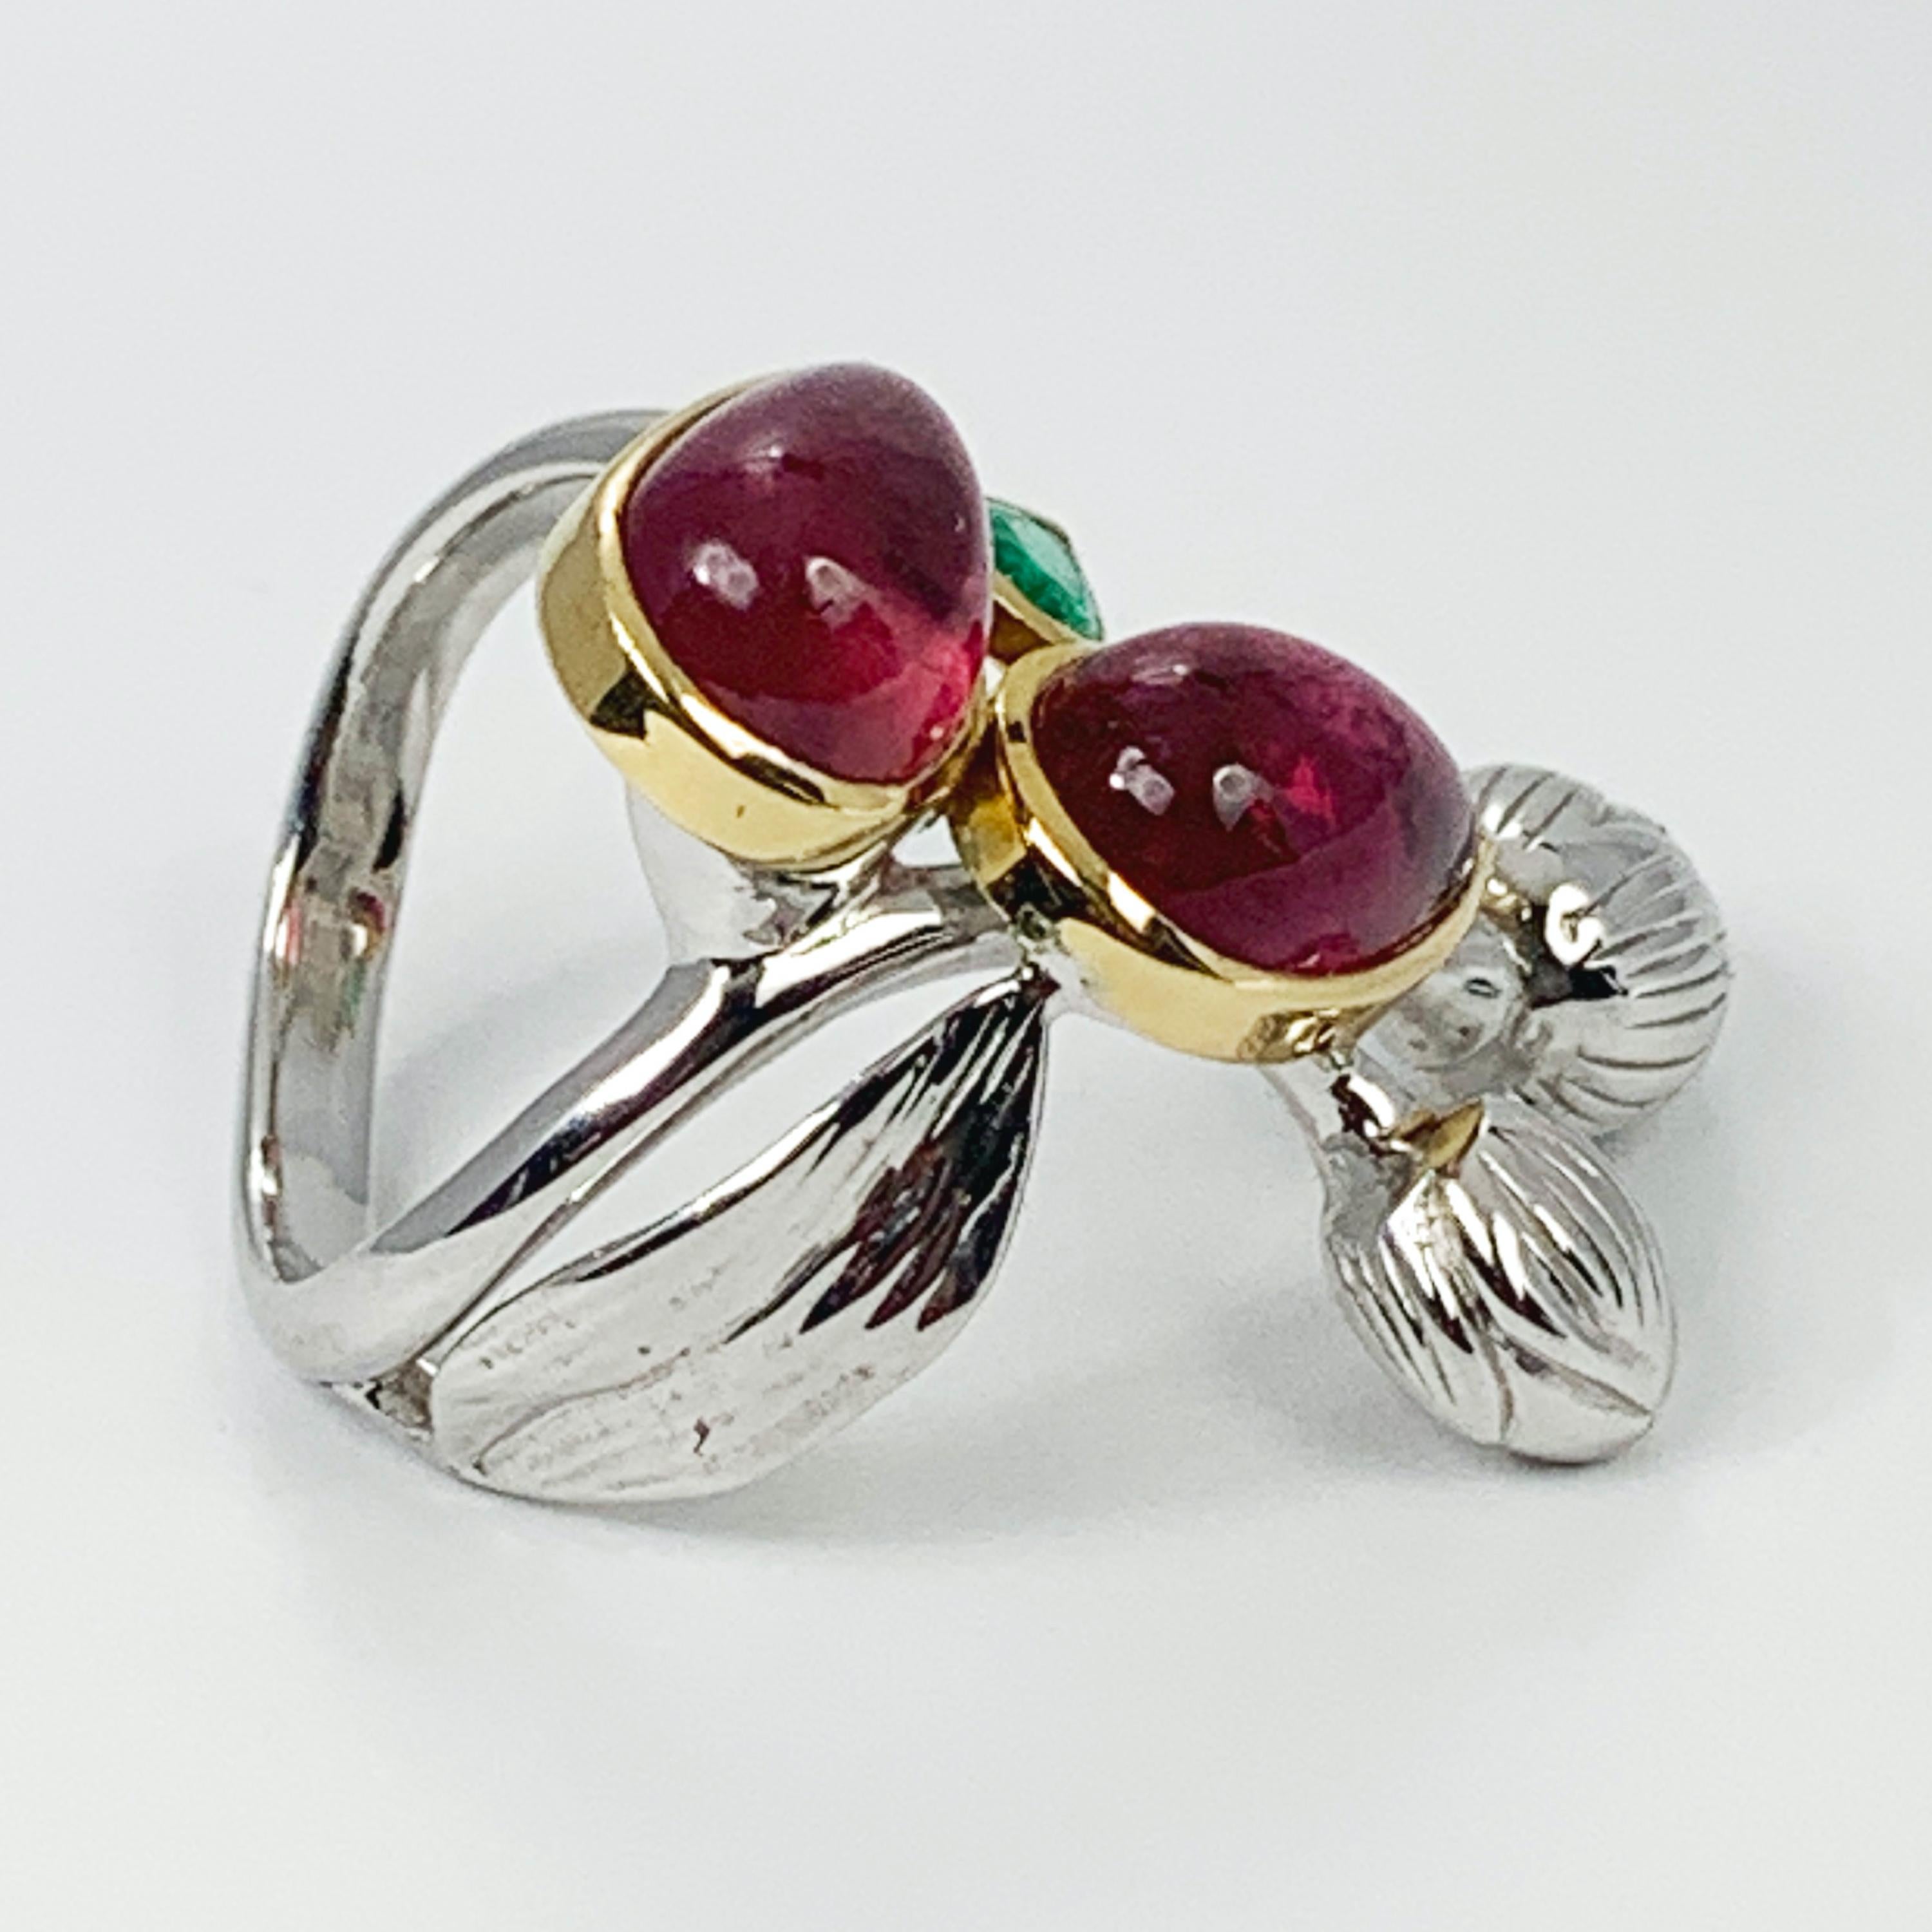 Contemporary “Cherry Branch” Emerald, Rubellite, 18K Yellow and White Gold Ring by Édéenne For Sale